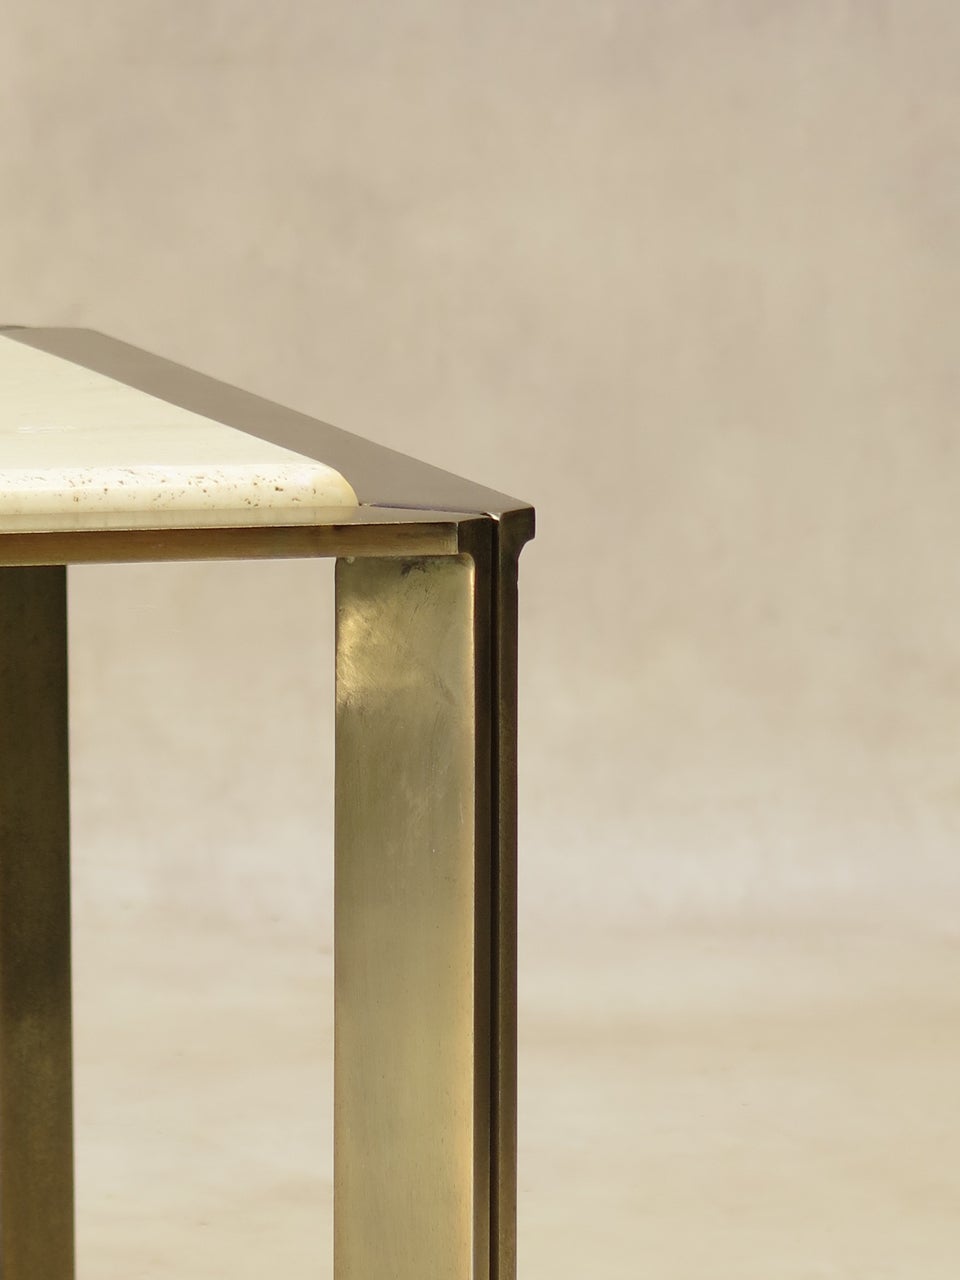 Chic and minimalist coffee table. Brushed steel structure with gold-coloured finish, and a light travertine top with rounded edges.